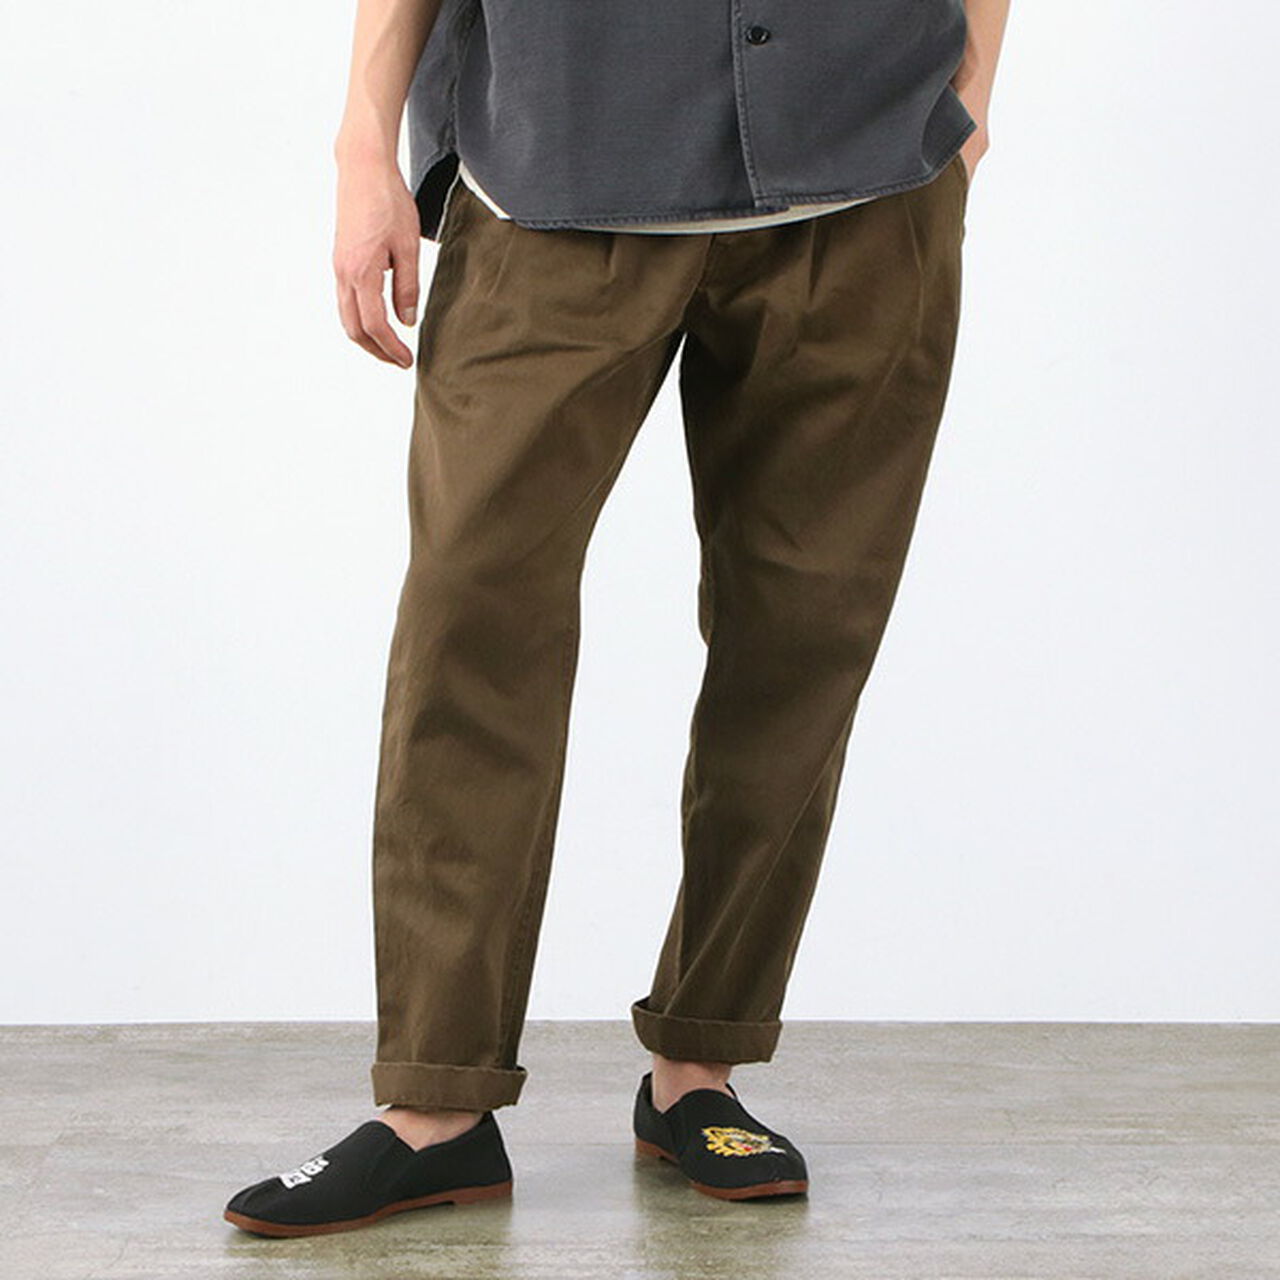 REMI RELIEF Chino 2-tuck pants